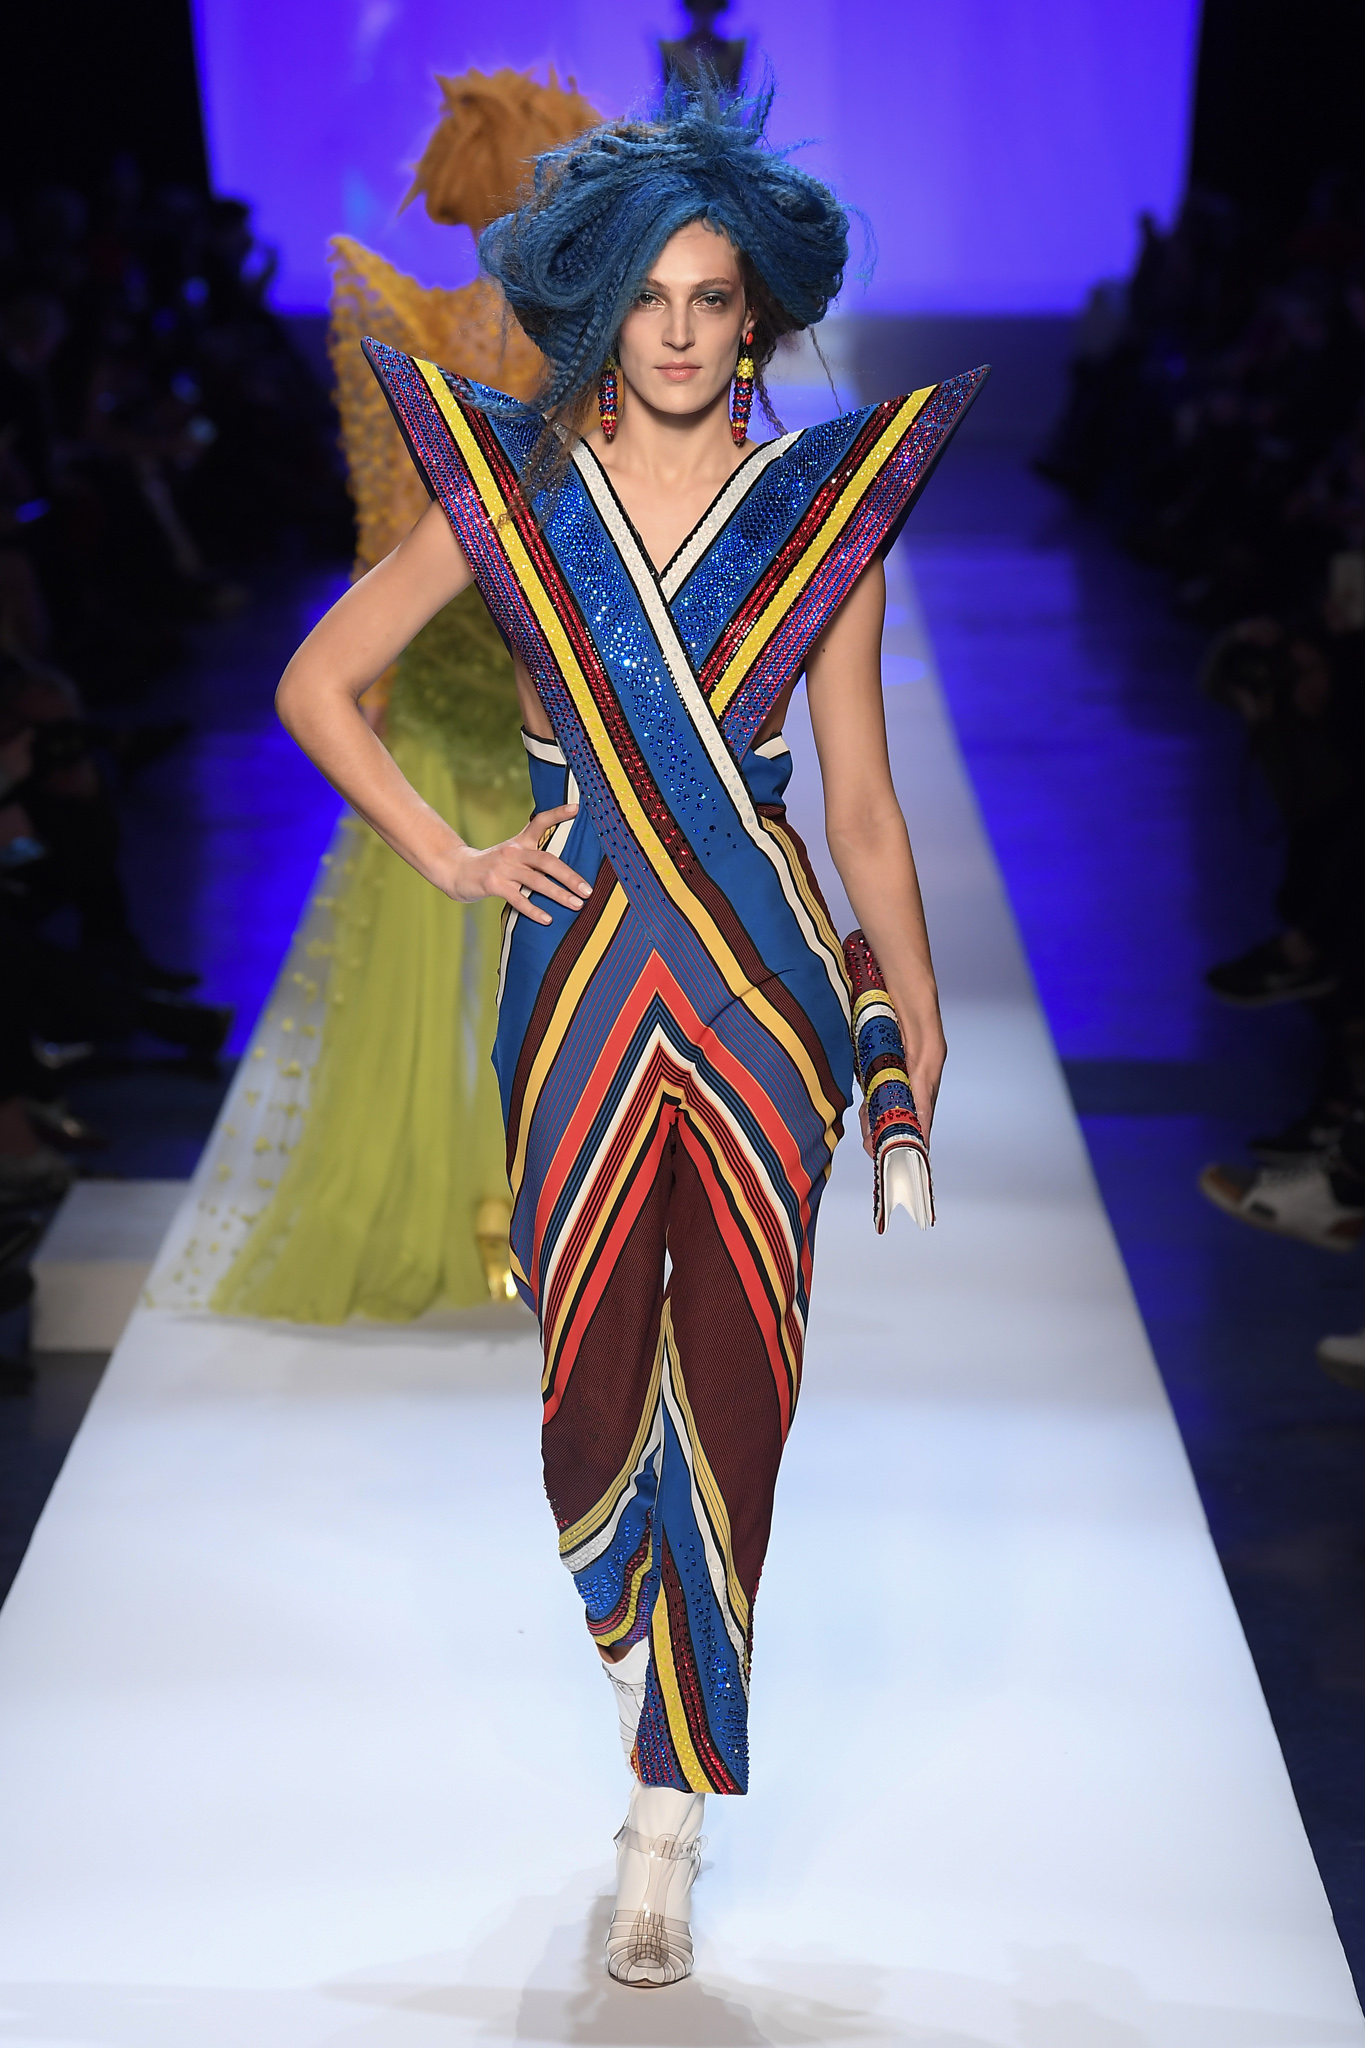 Jean Paul Gaultier Spring Summer 2019 Haute Couture Fashion Show